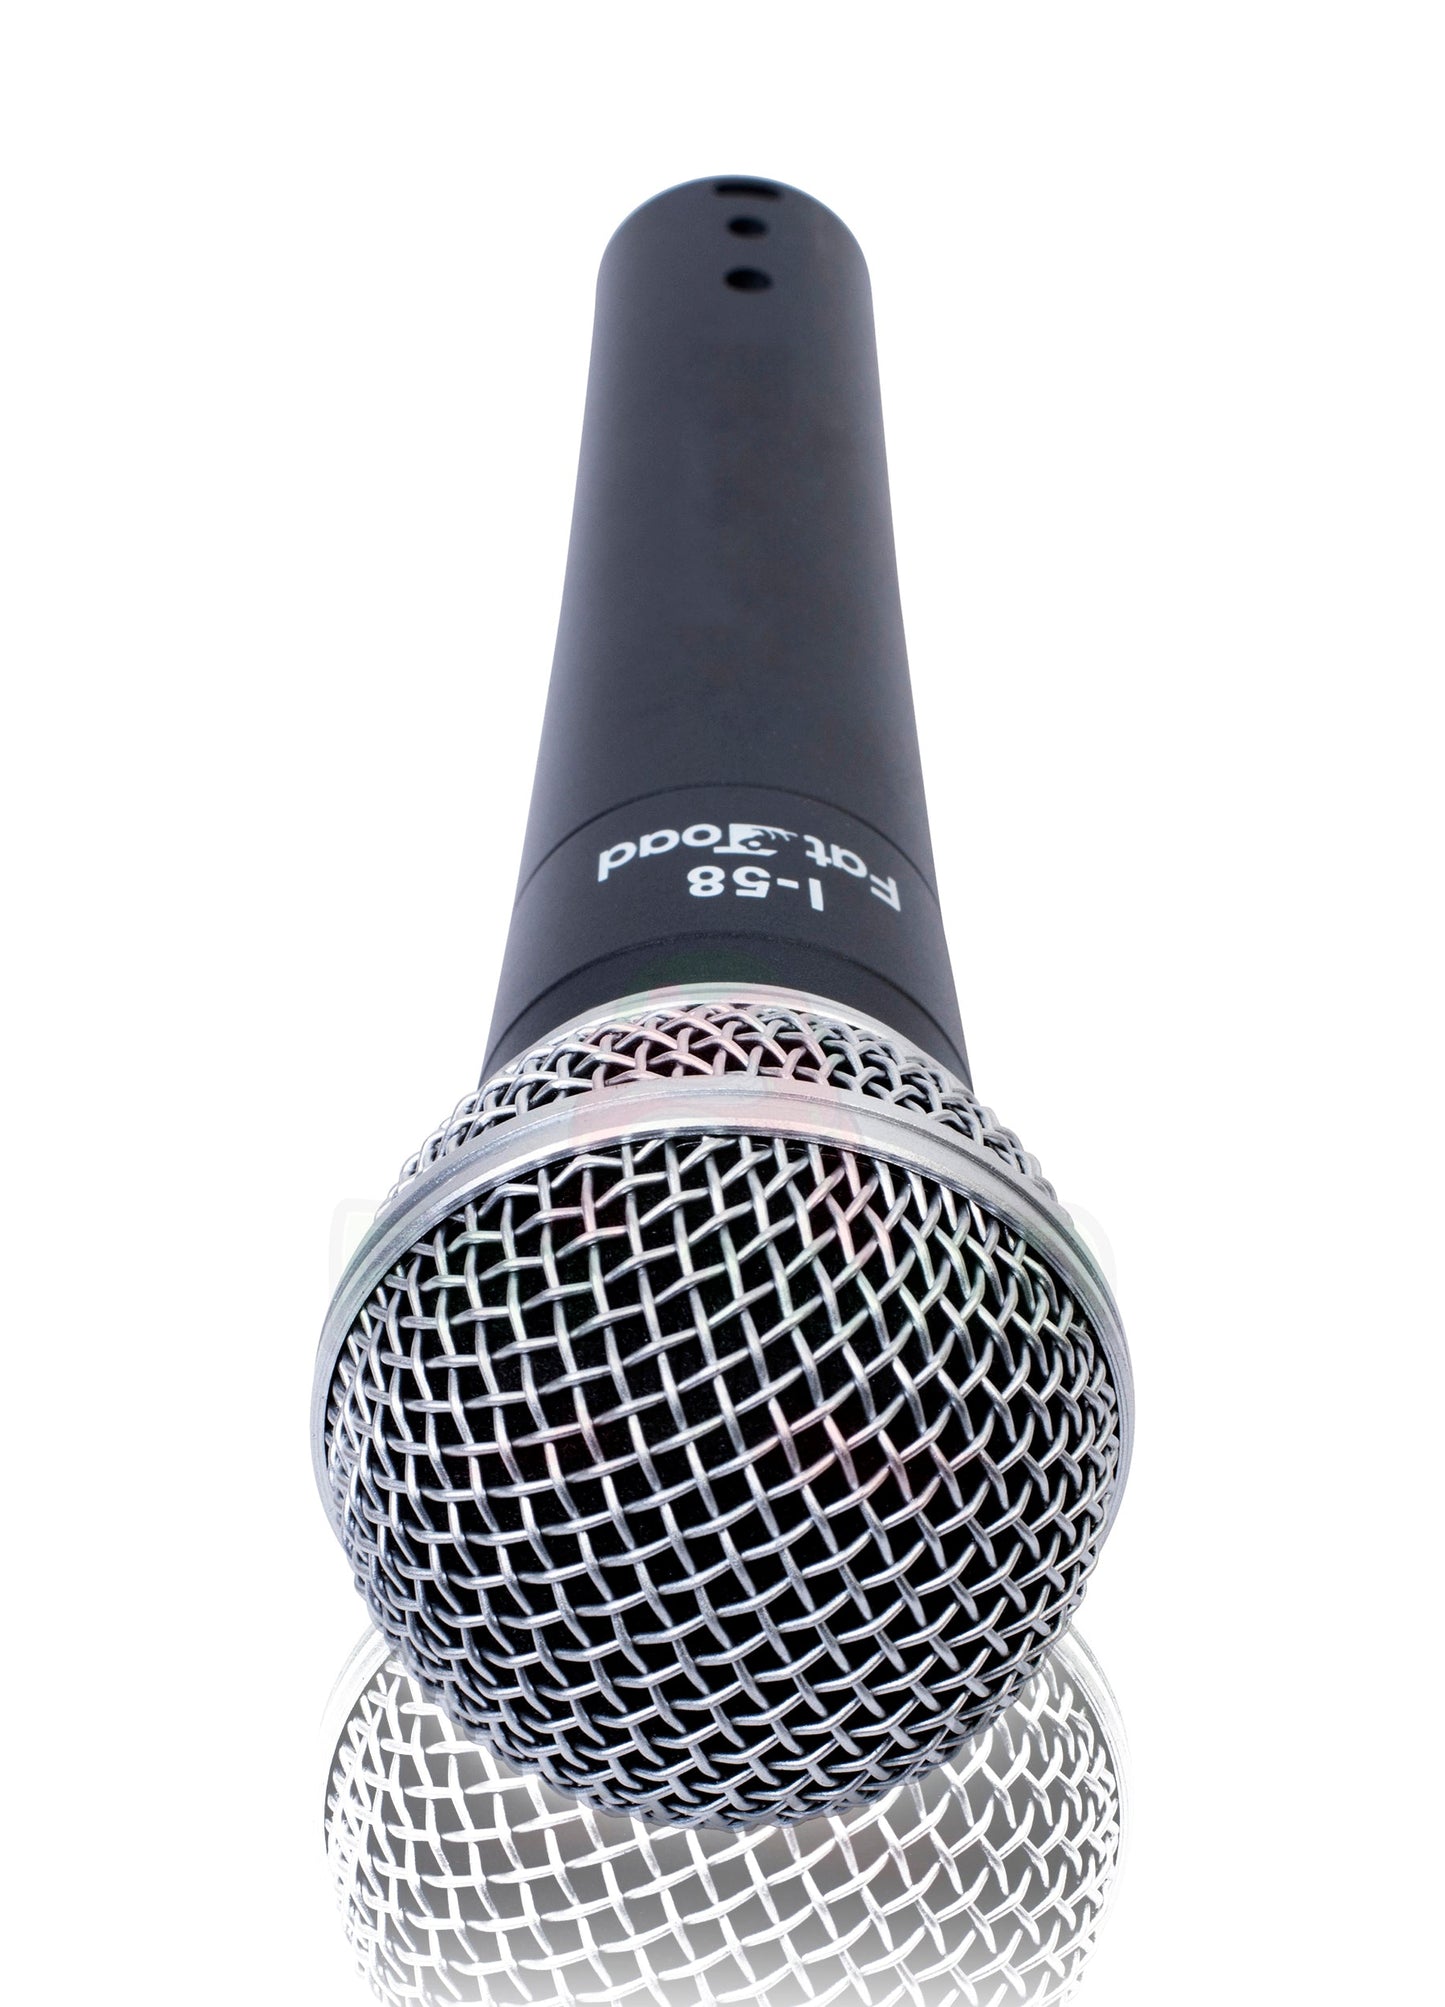 Cardioid Dynamic Microphone with Mic Clip by FAT TOAD - Vocal Handheld, Unidirectional Singing Mic